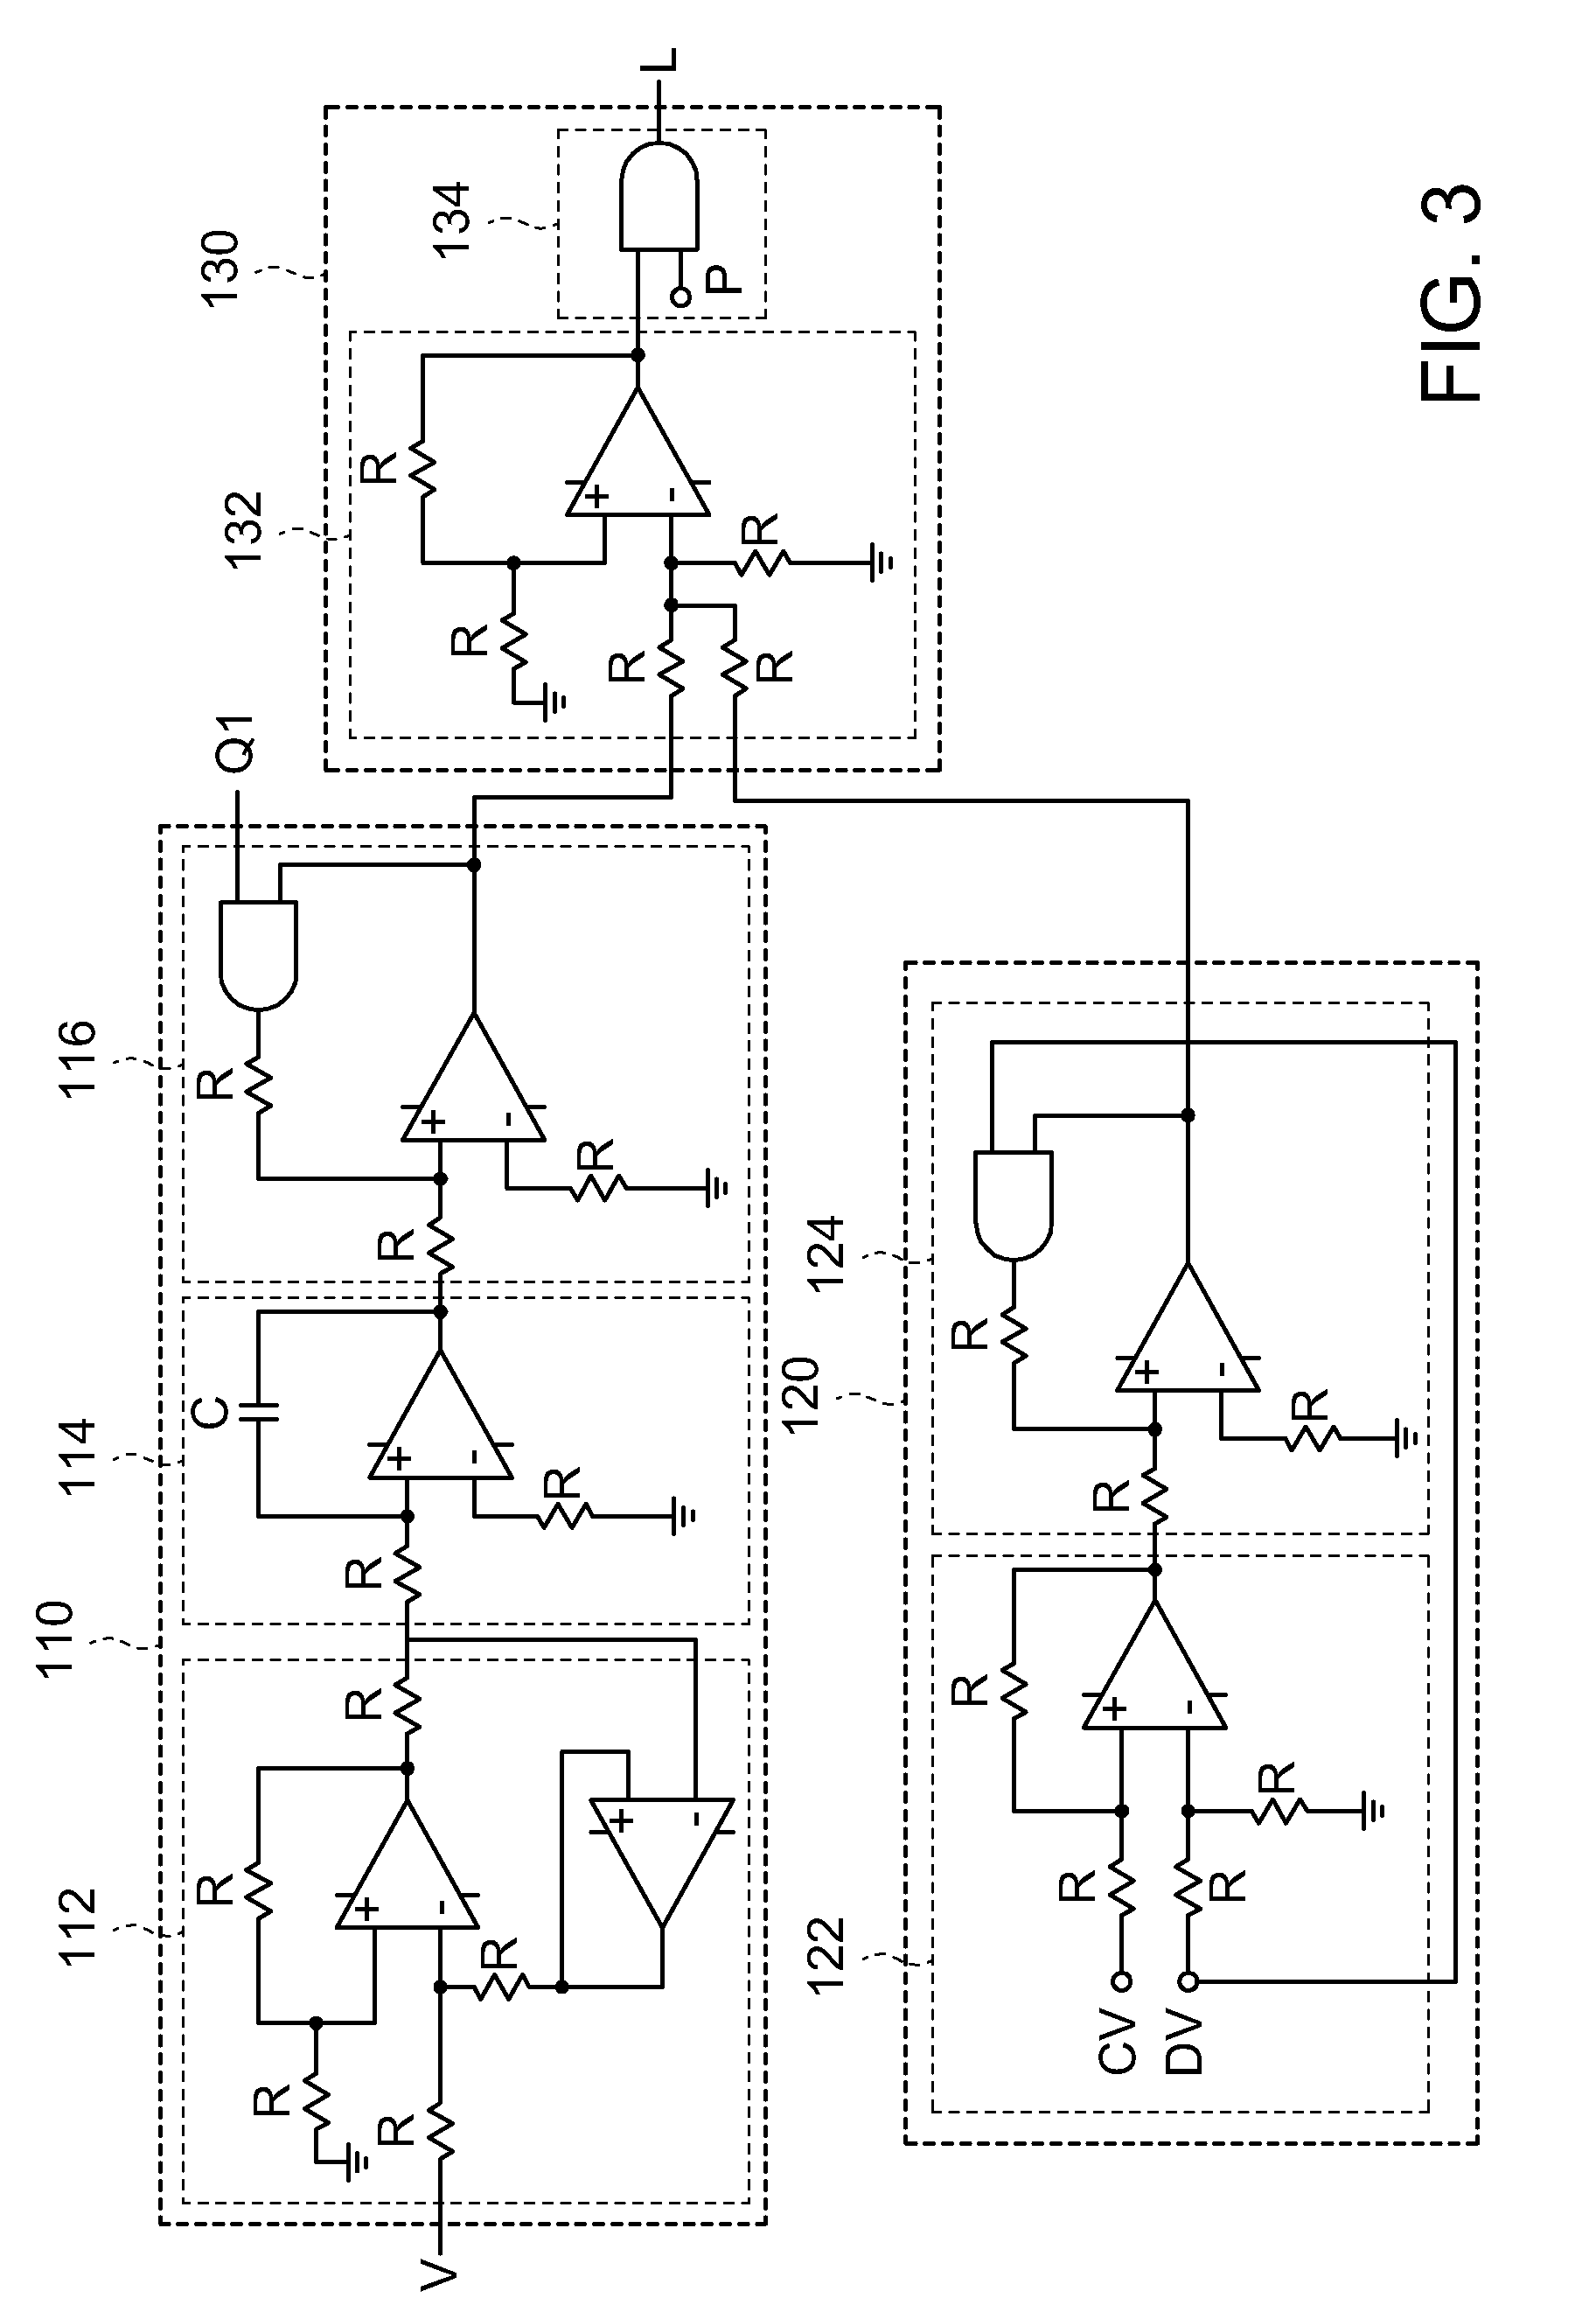 Battery life alarm system and battery life alarm method